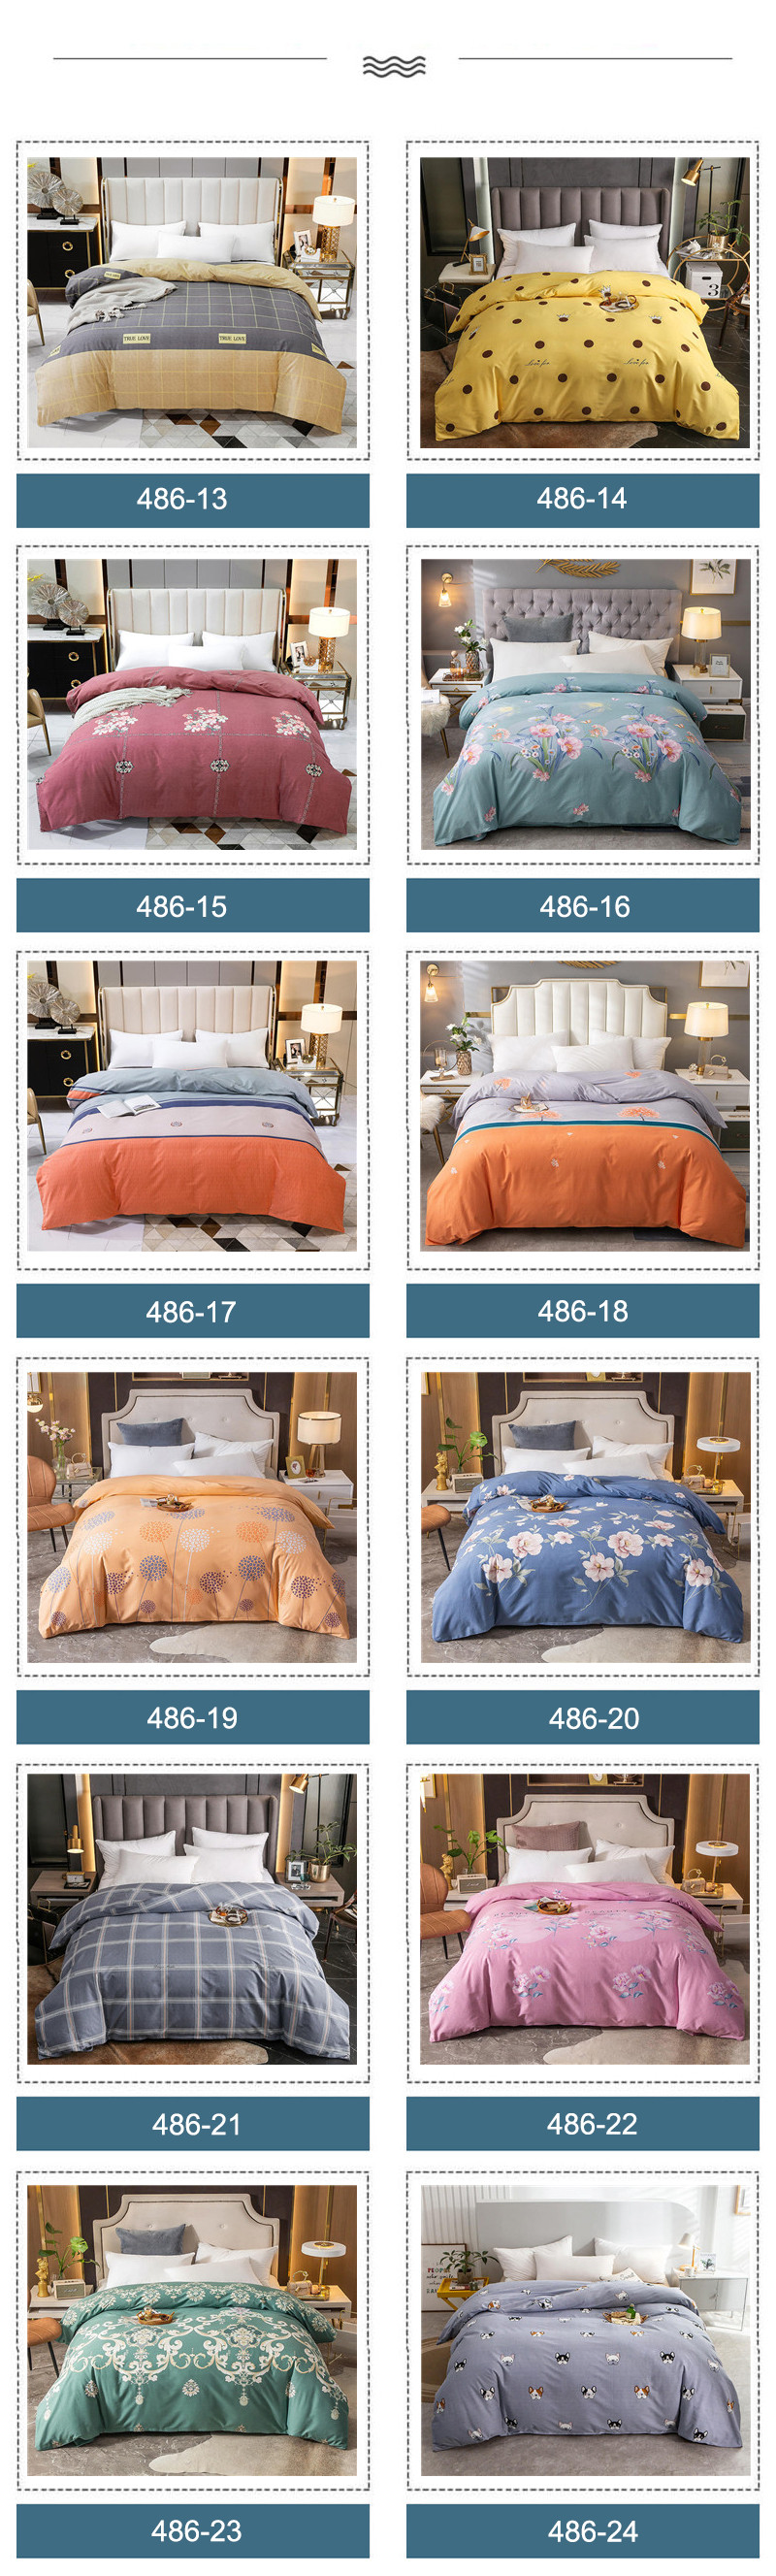 Cotton Bed Sheets Discount